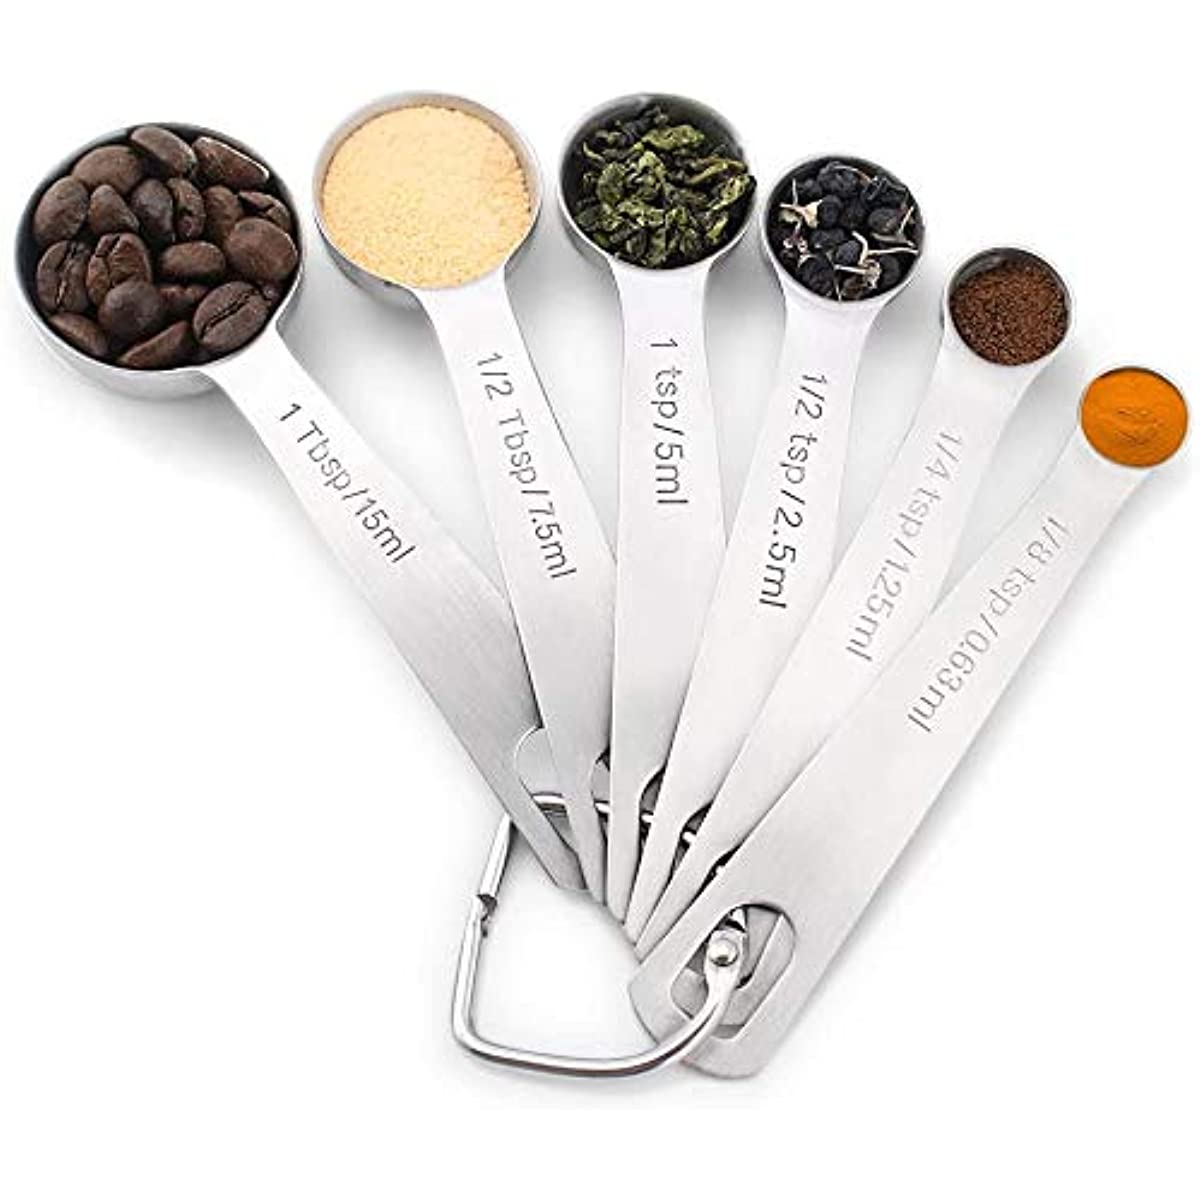 

Set, Premium Heavy Duty 18/8 Stainless Steel Measuring Spoons Cups Set, Small Tablespoon With Metric And Us Measurements, Set Of 6 For Gift Measuring Dry And Liquid Ingredients